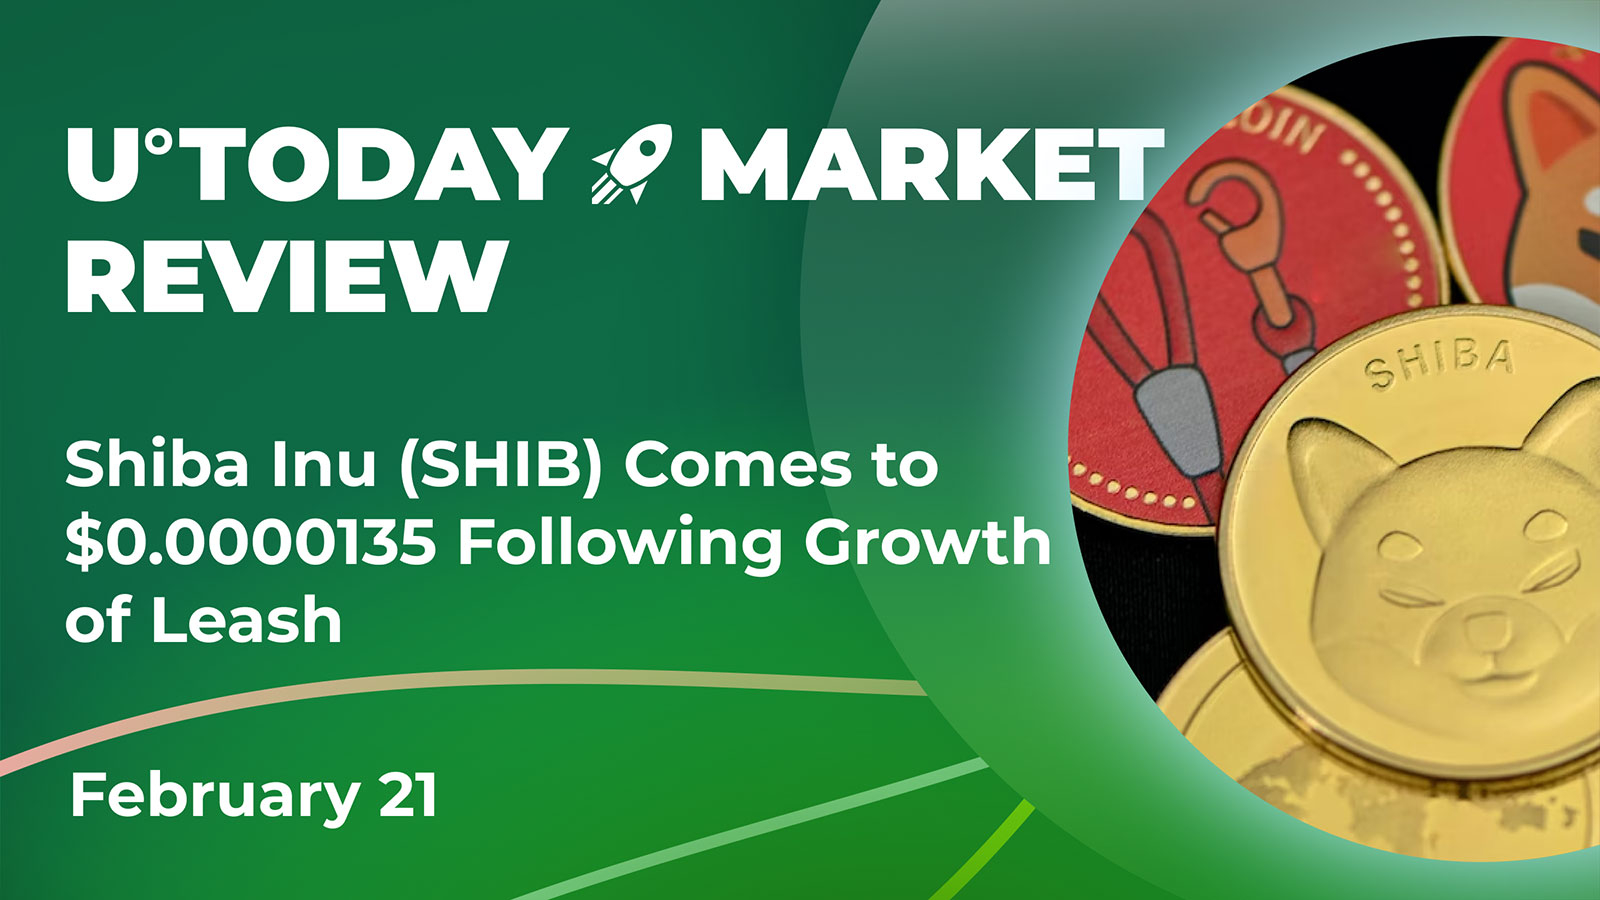 Shiba Inu (SHIB) Comes to $0.0000135 Following Growth of Leash and Other Shiba-Related Assets